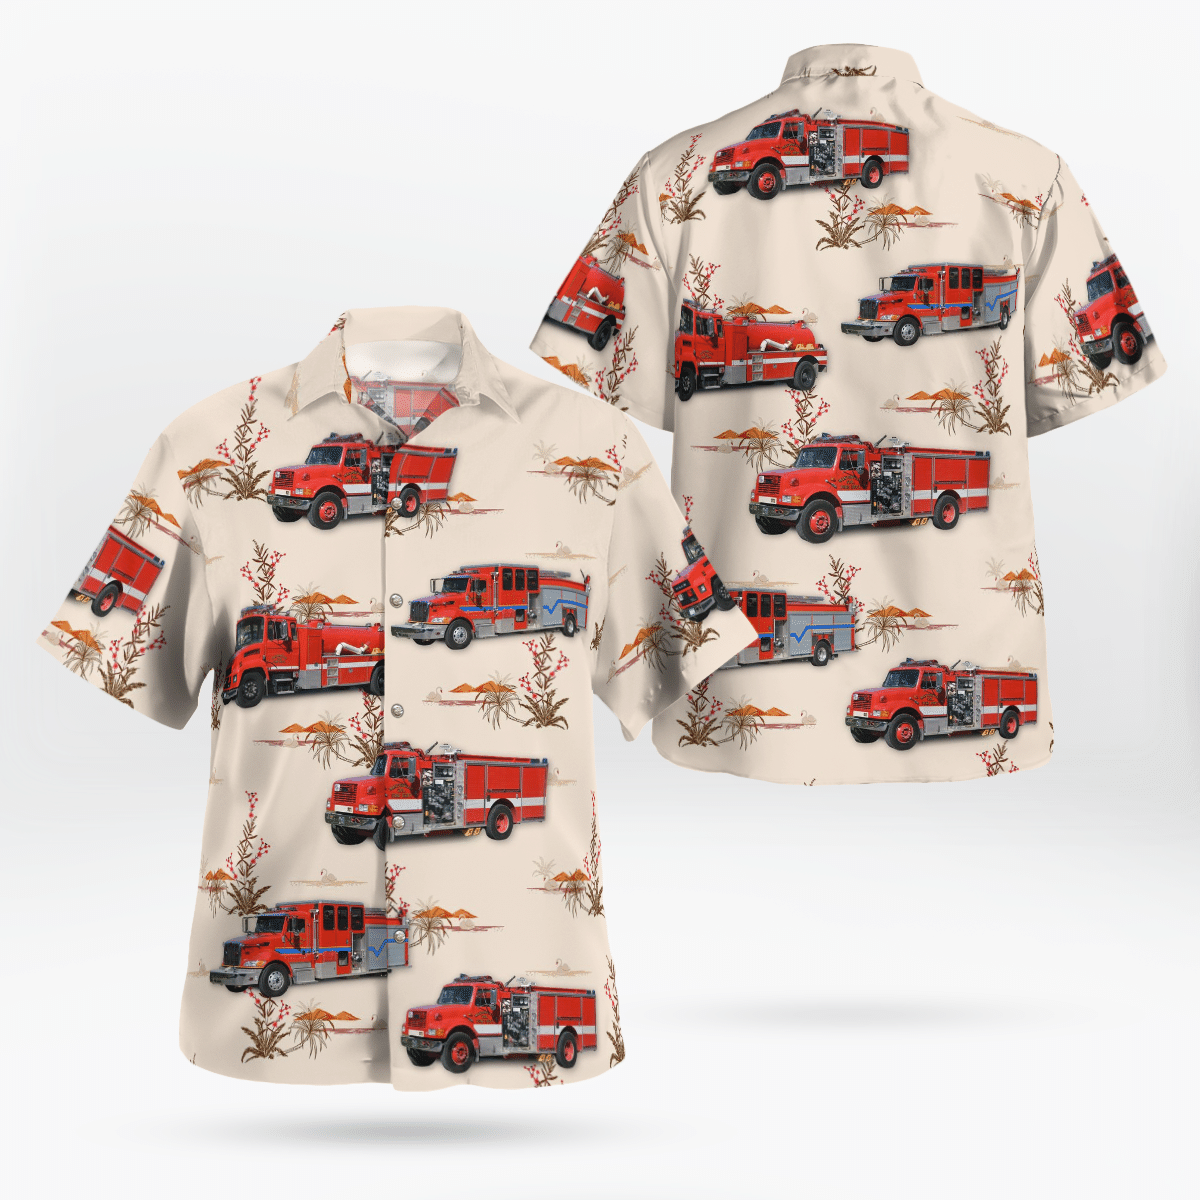 Consider getting these Hawaiian Shirt for your friends 51